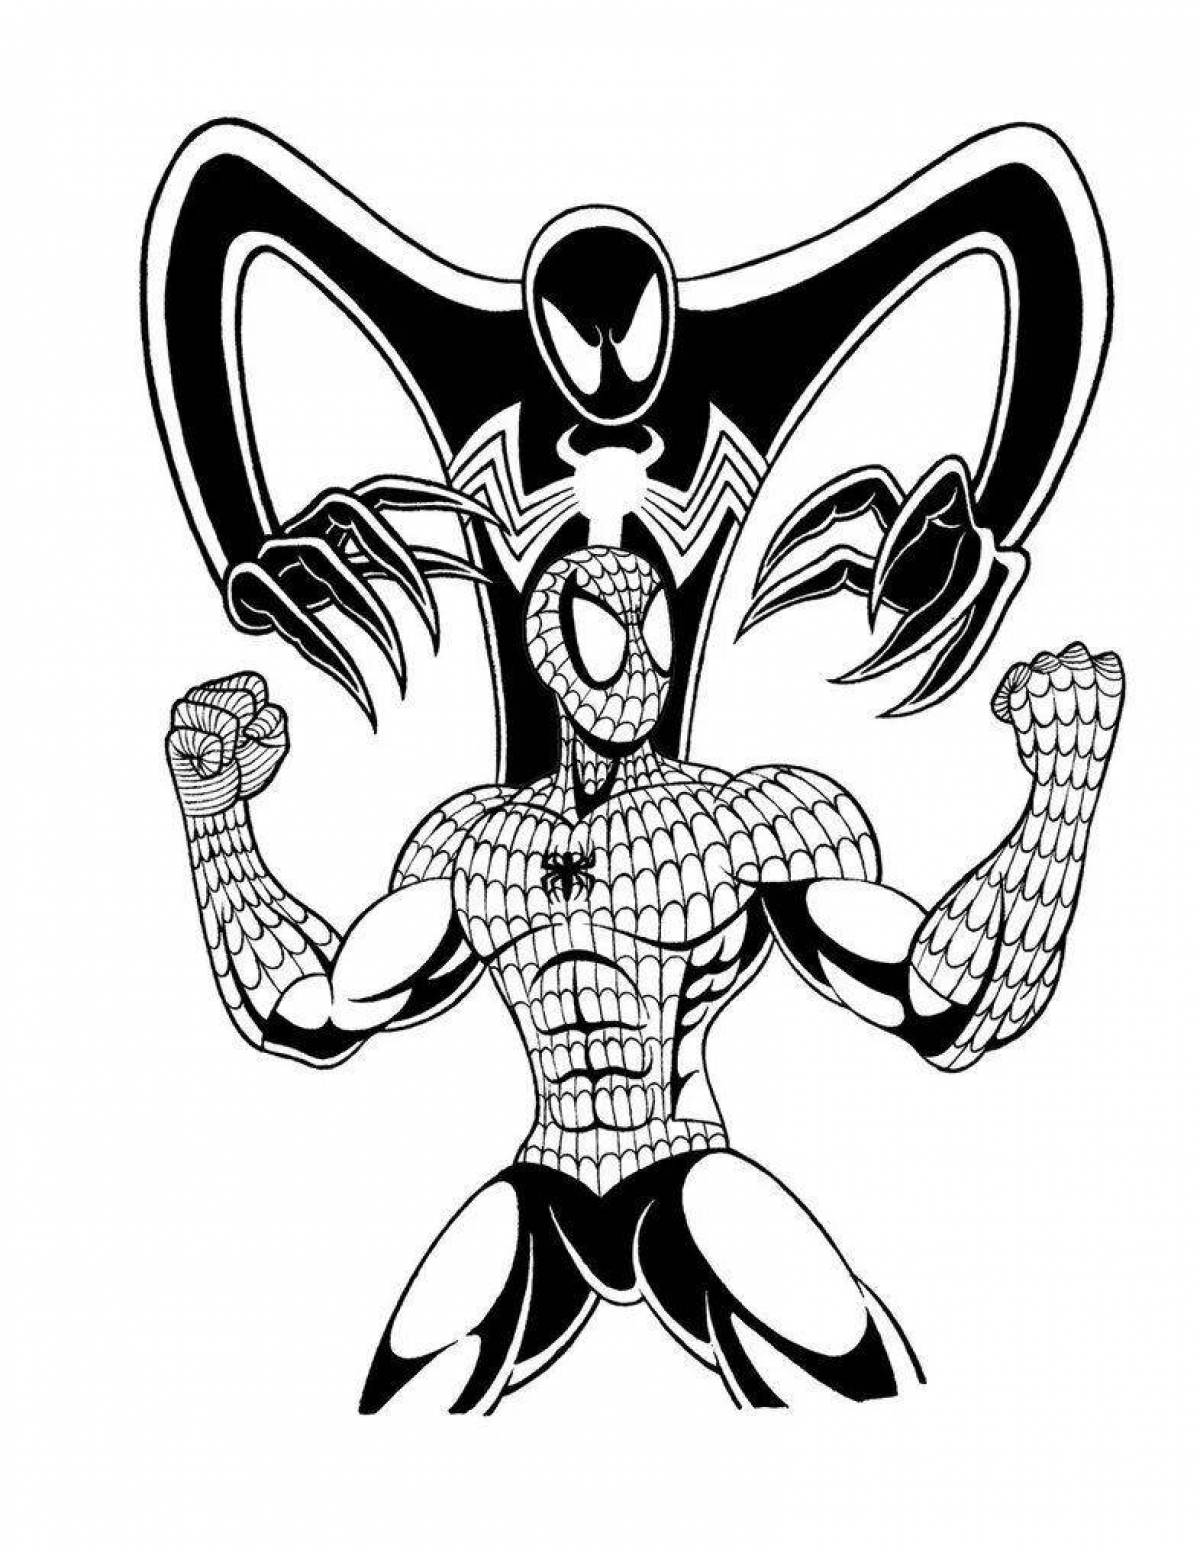 Richly shaded spider-man symbiote coloring book